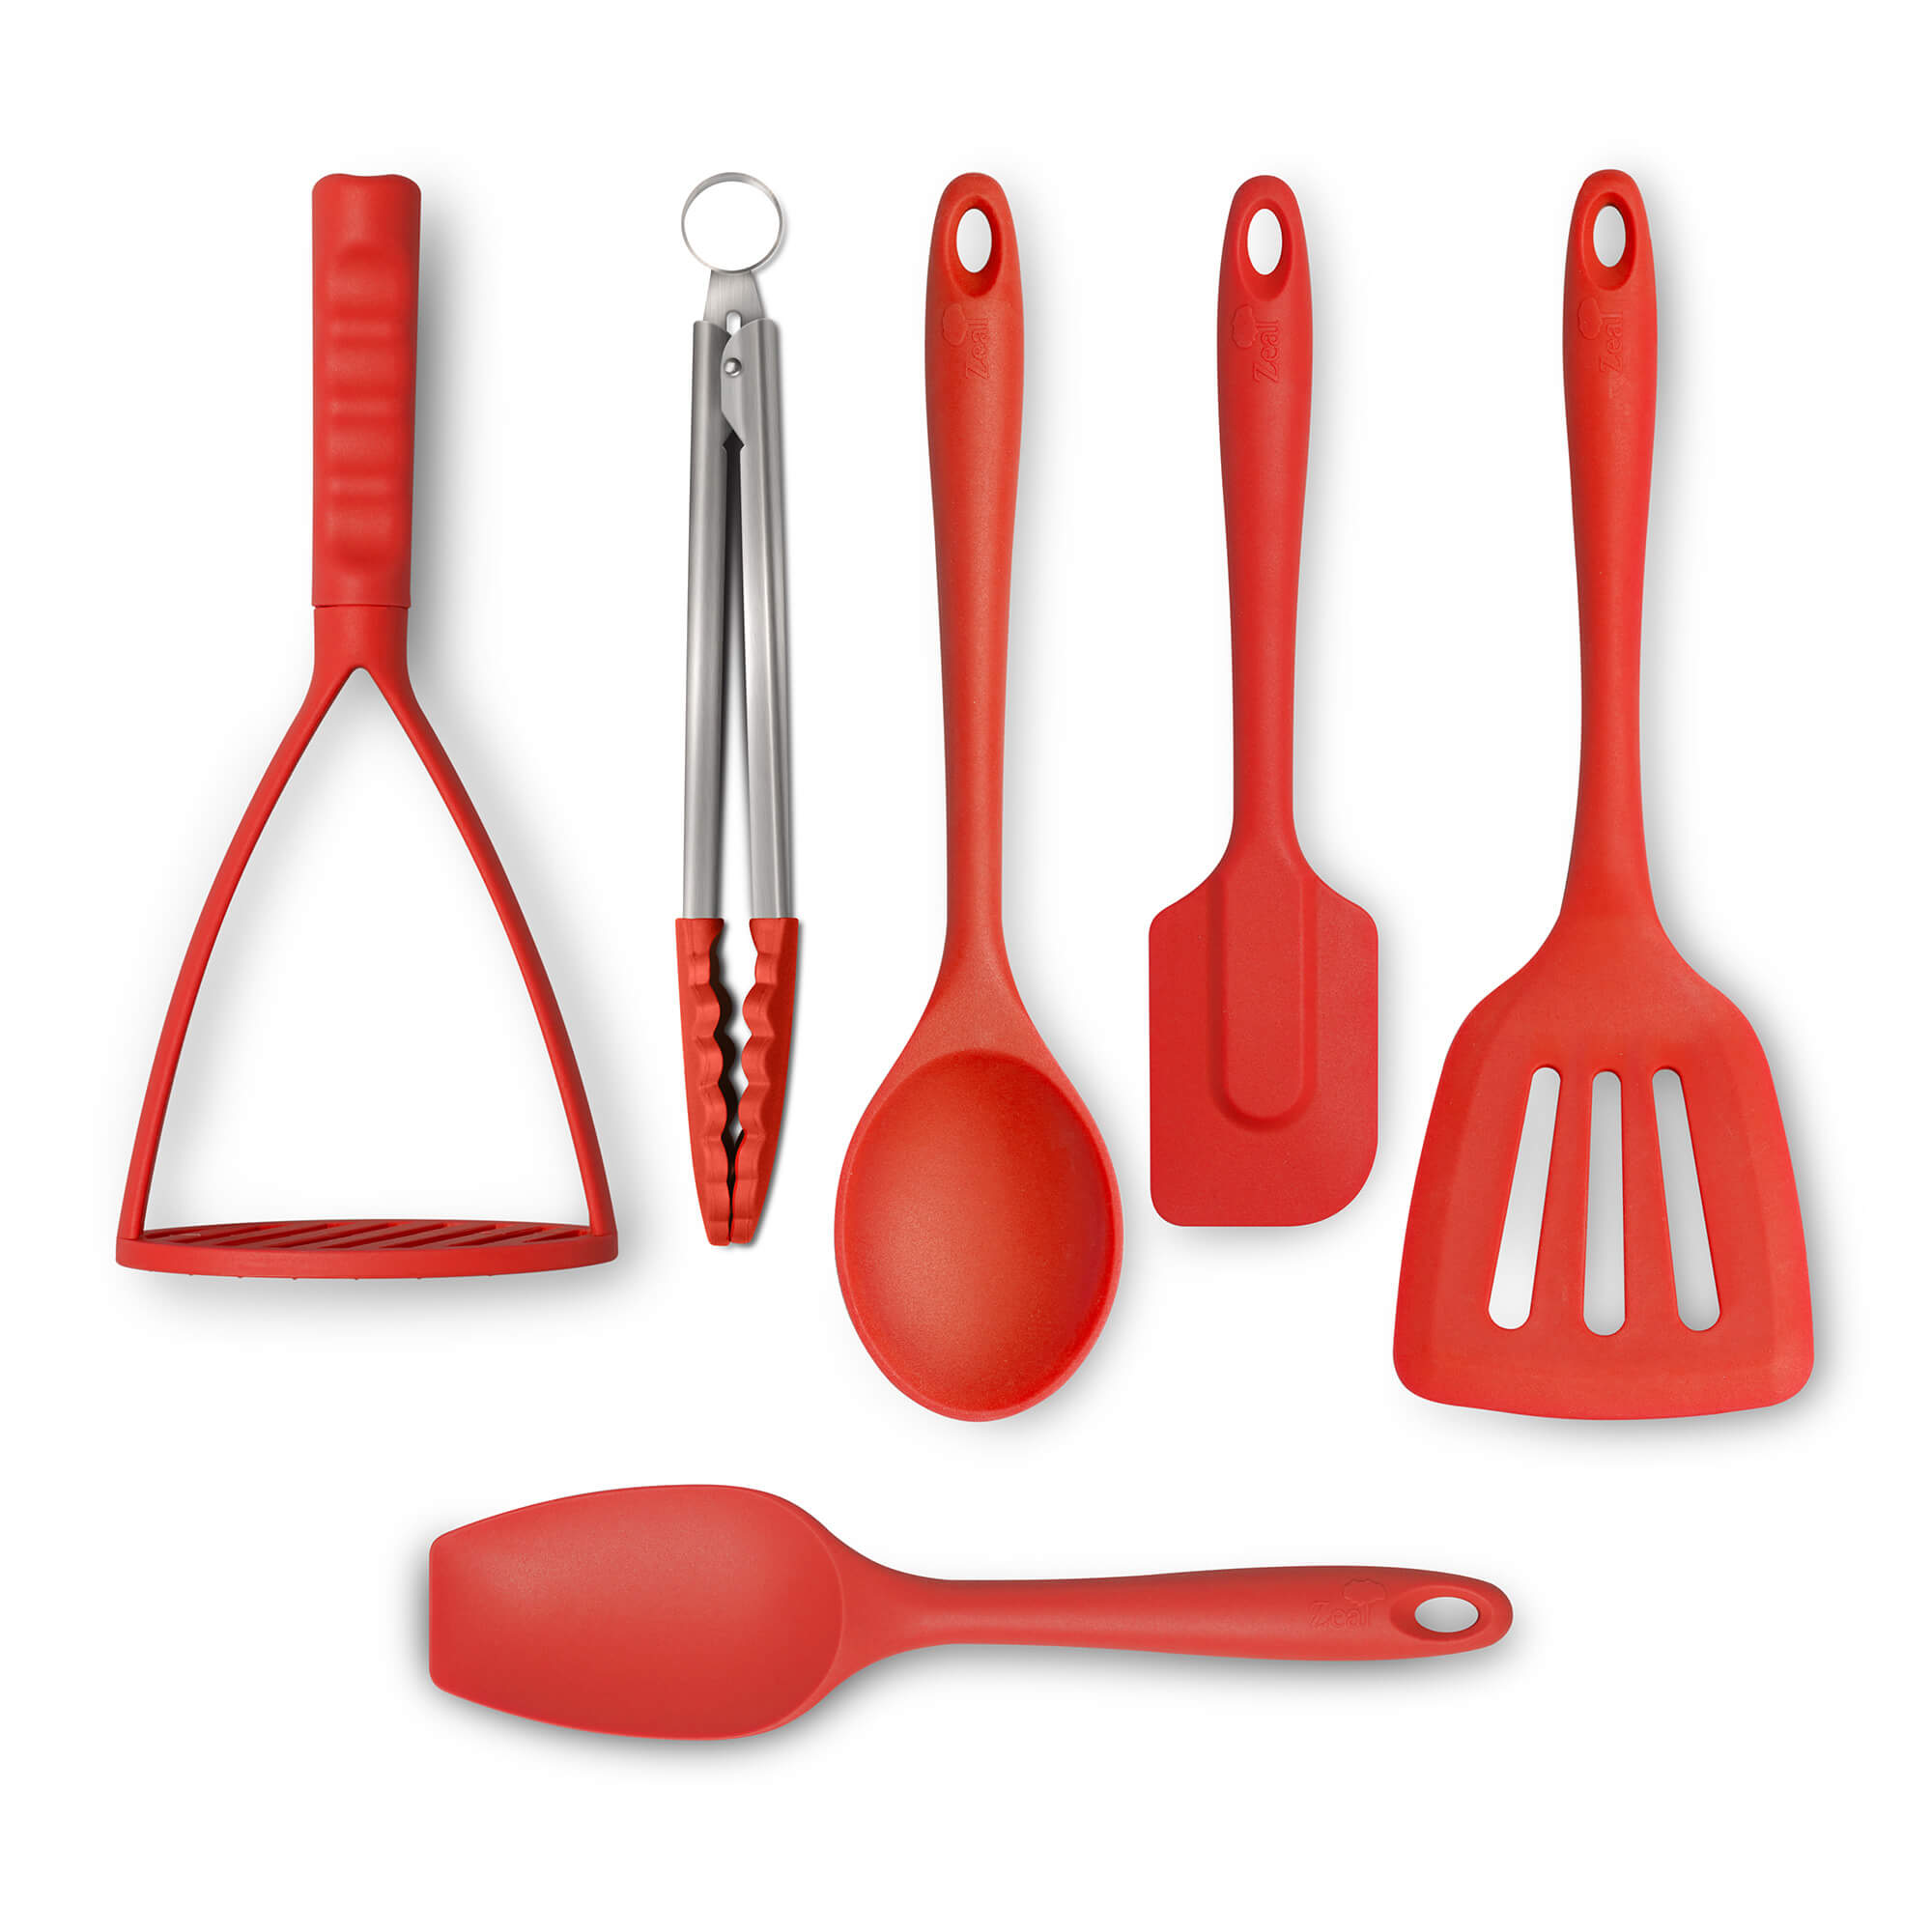 Kitchen Set with Masher, Tongs, Skimmer, Spatula, and Brush, Red Articulos  de cocina y hogar ofertas Accesorios cocina For kitch - AliExpress